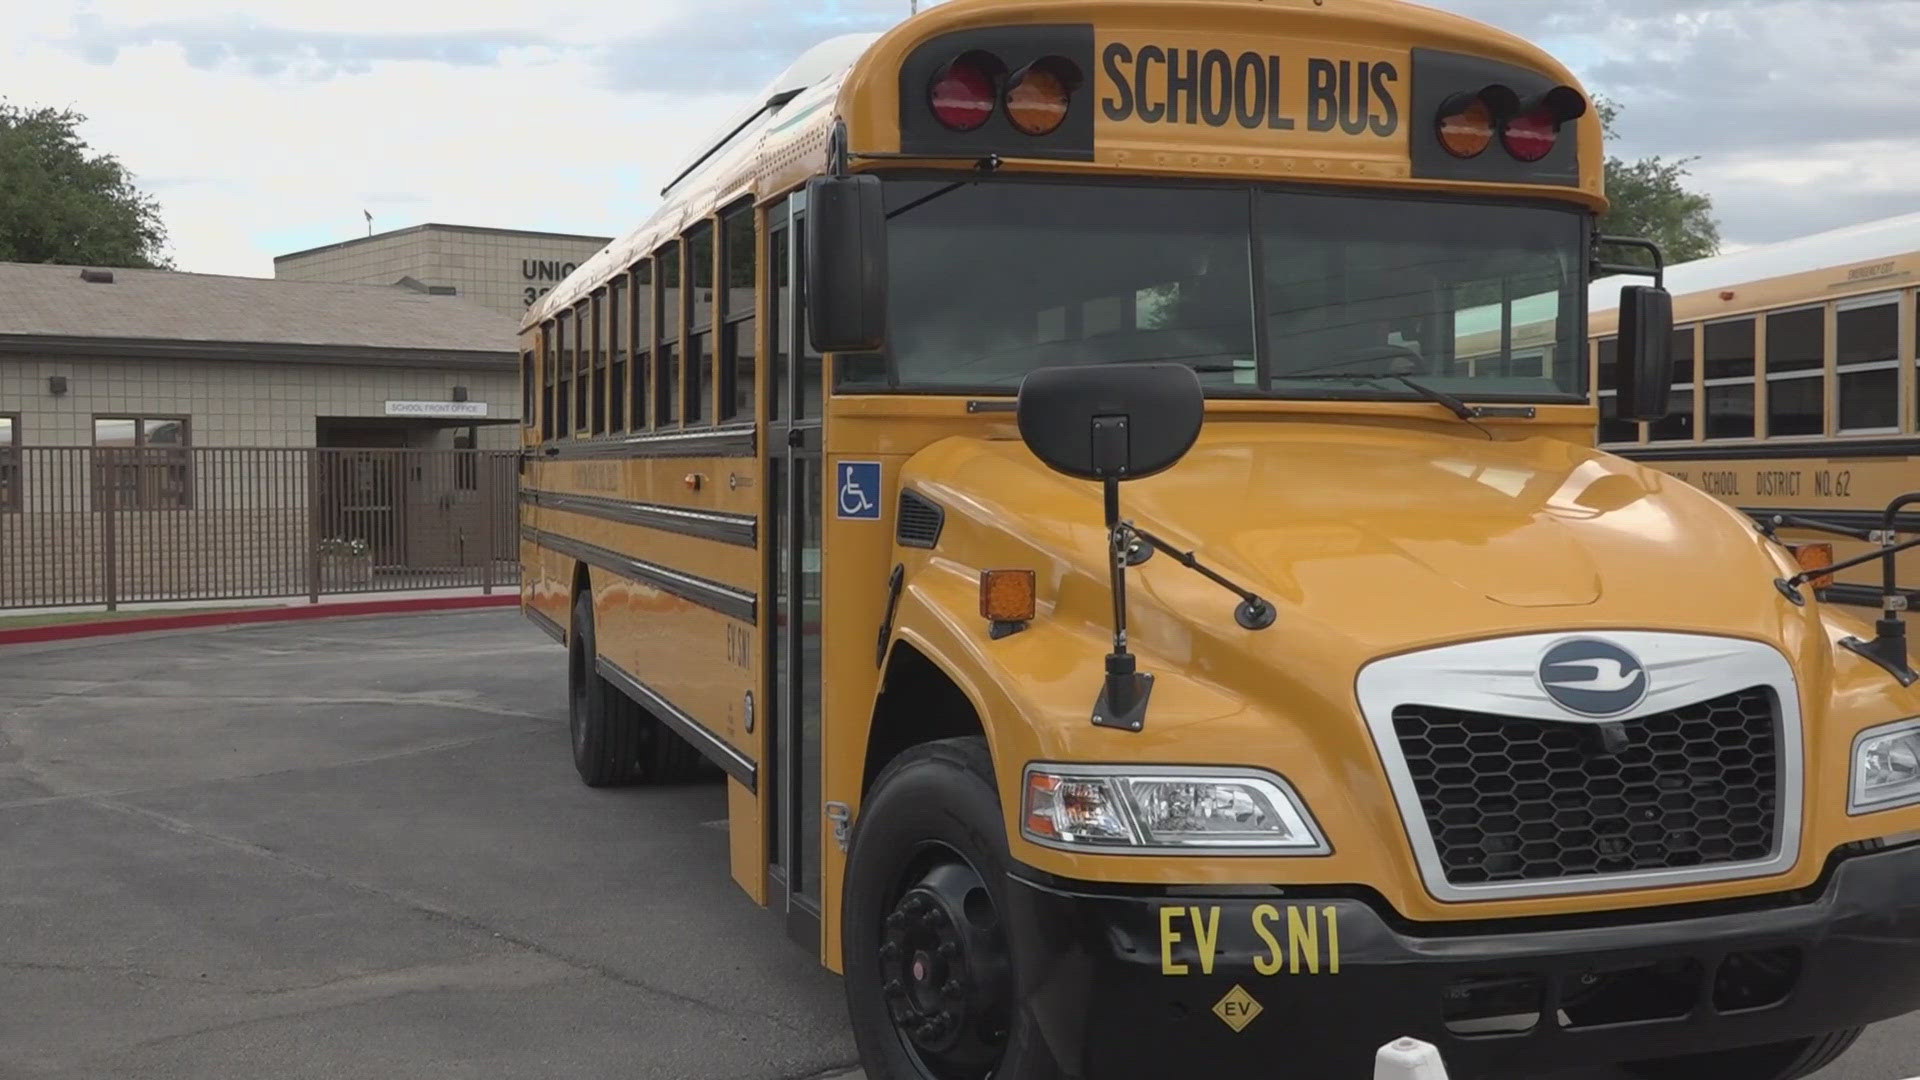 Union Elementary in the West Valley just received a grant to purchase two electric school busses. Here are the details.